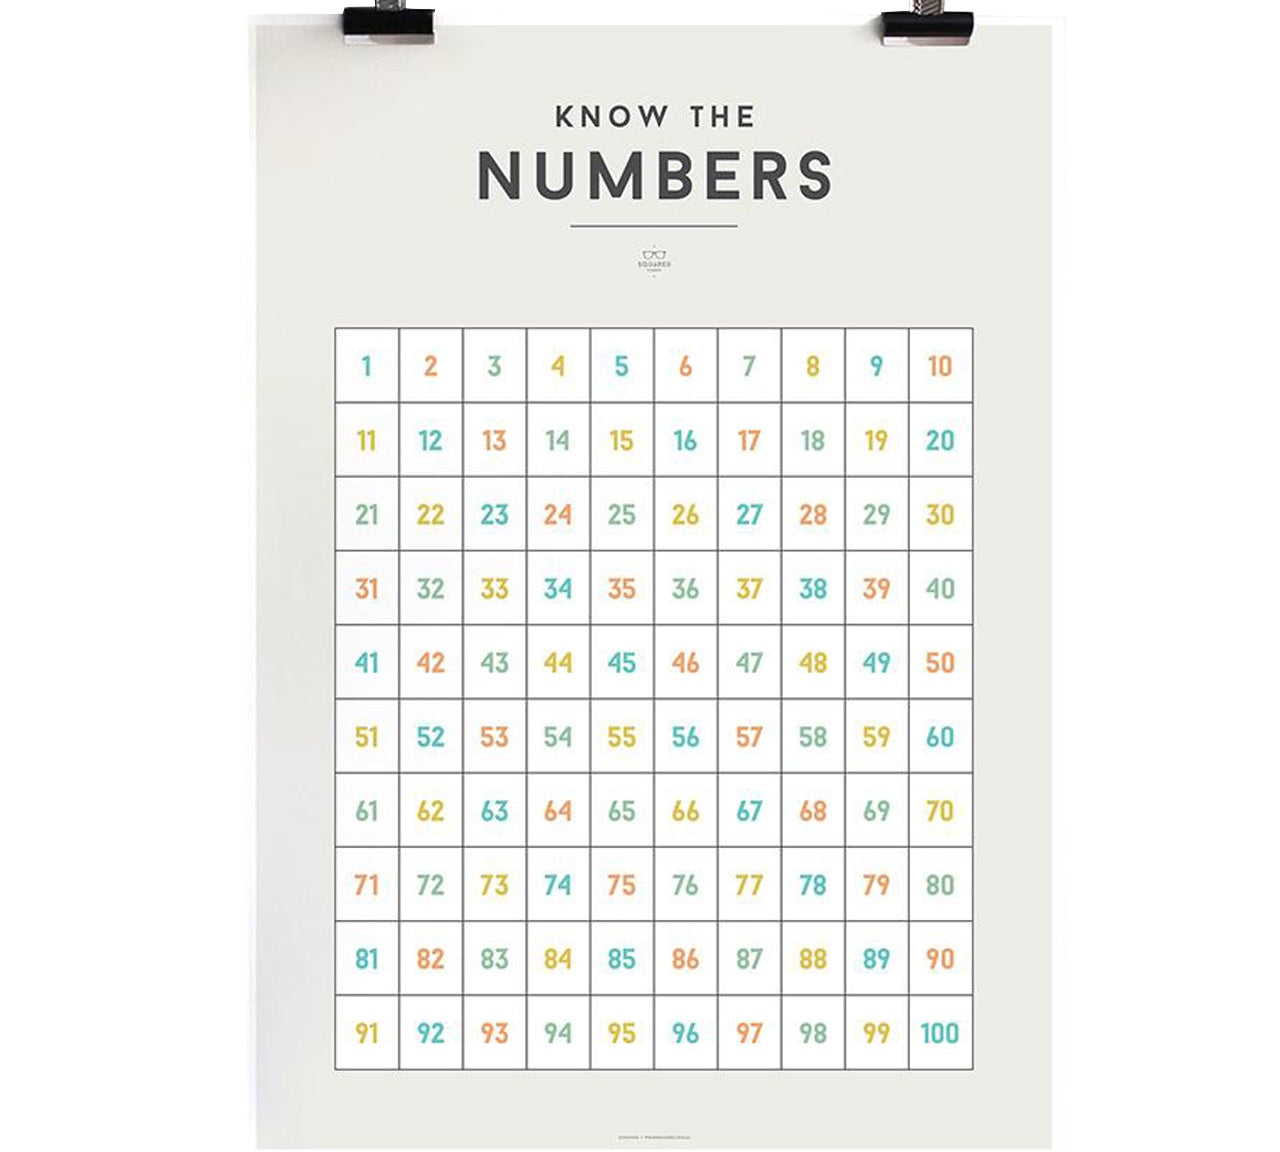 Deer Industries Squared Educational Kids Poster Numbers. Gender neutral wall decoration for kids bedroom, playroom or nursery. Educational yet stylish charts posters in soft pastel colours. Made in Australia.